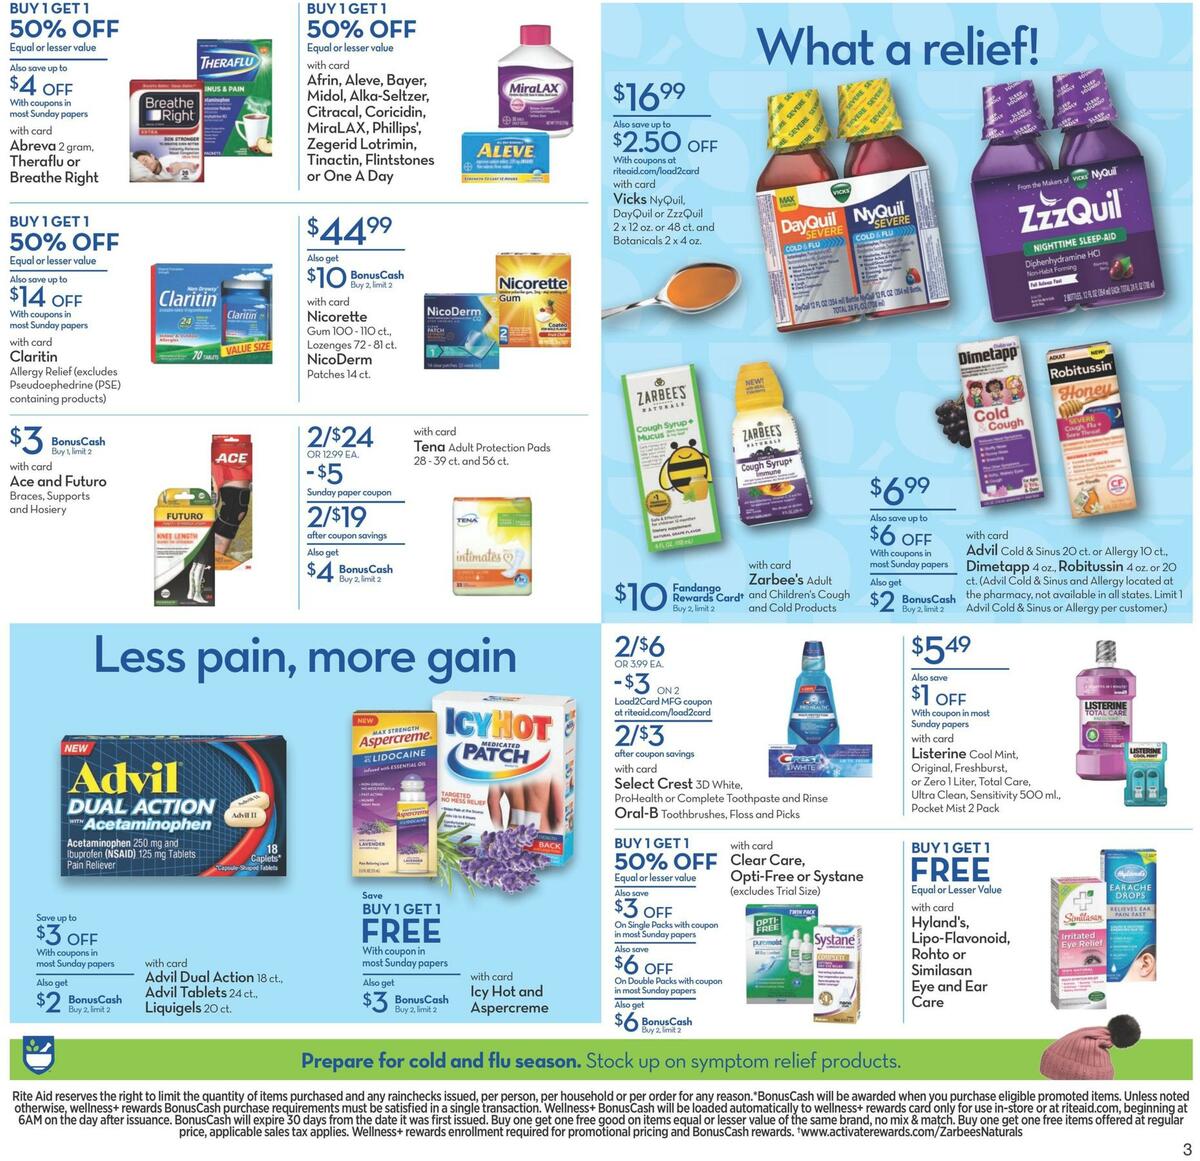 Rite Aid Weekly Ad from November 1